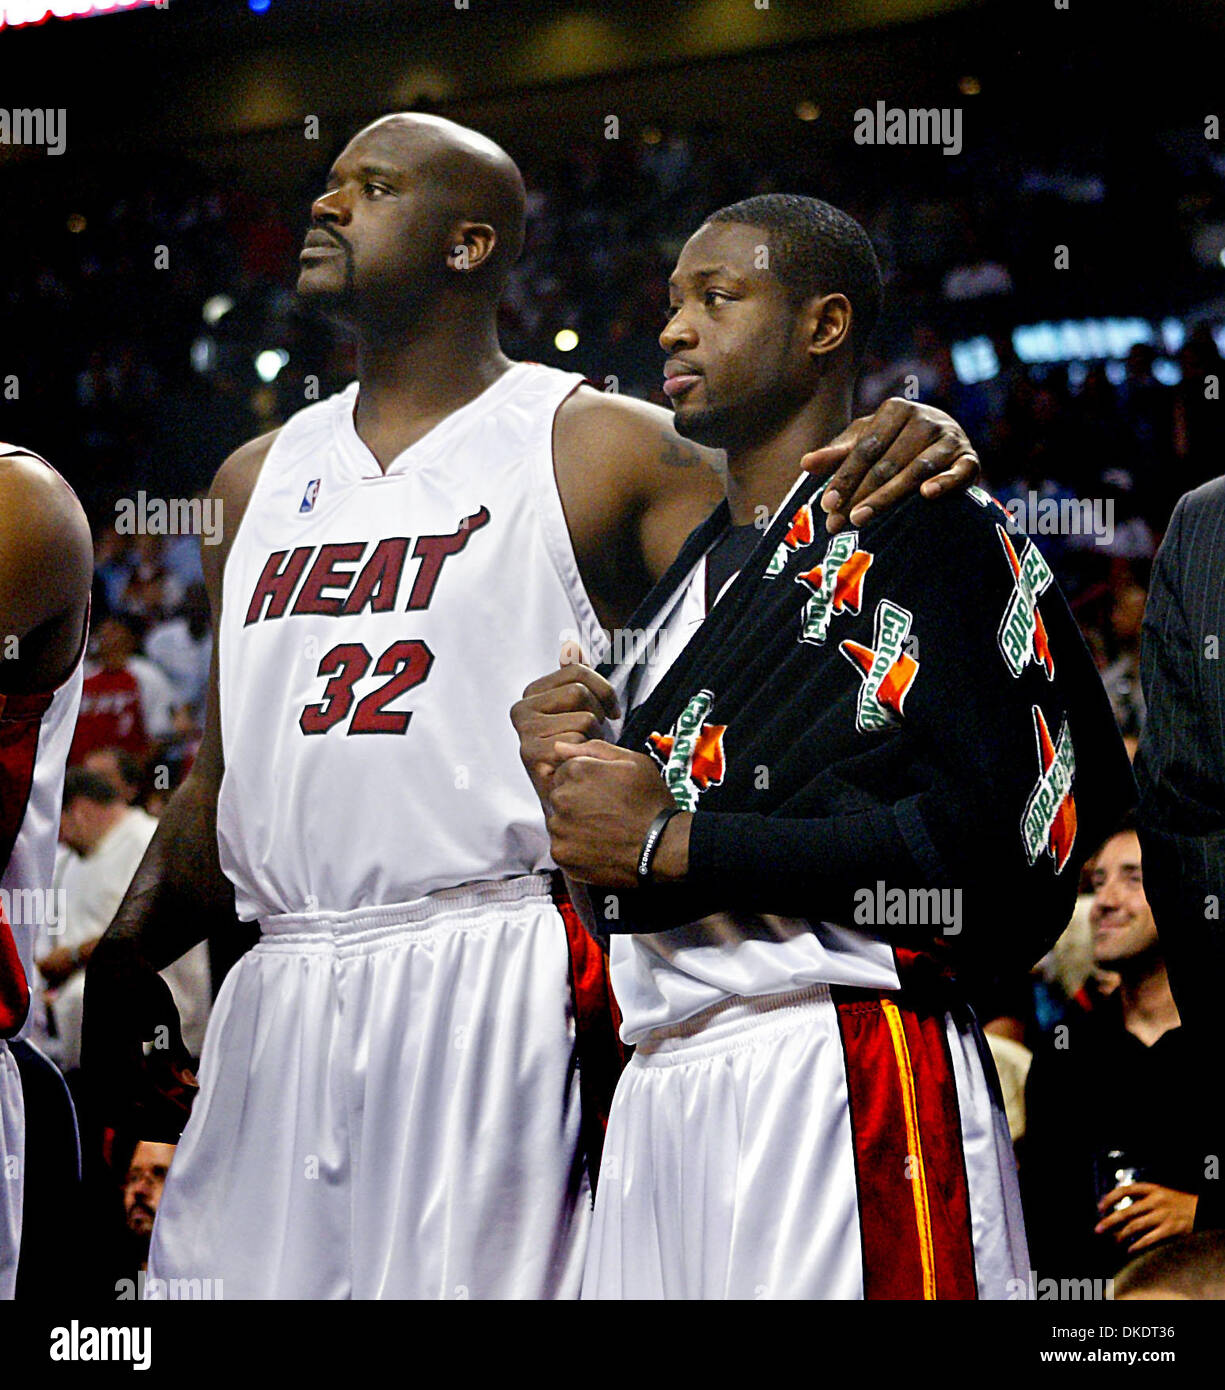 Apr 16, 2007 - Miami, FL, USA - SHAQUILLE O'NEAL and DWYANE WADE